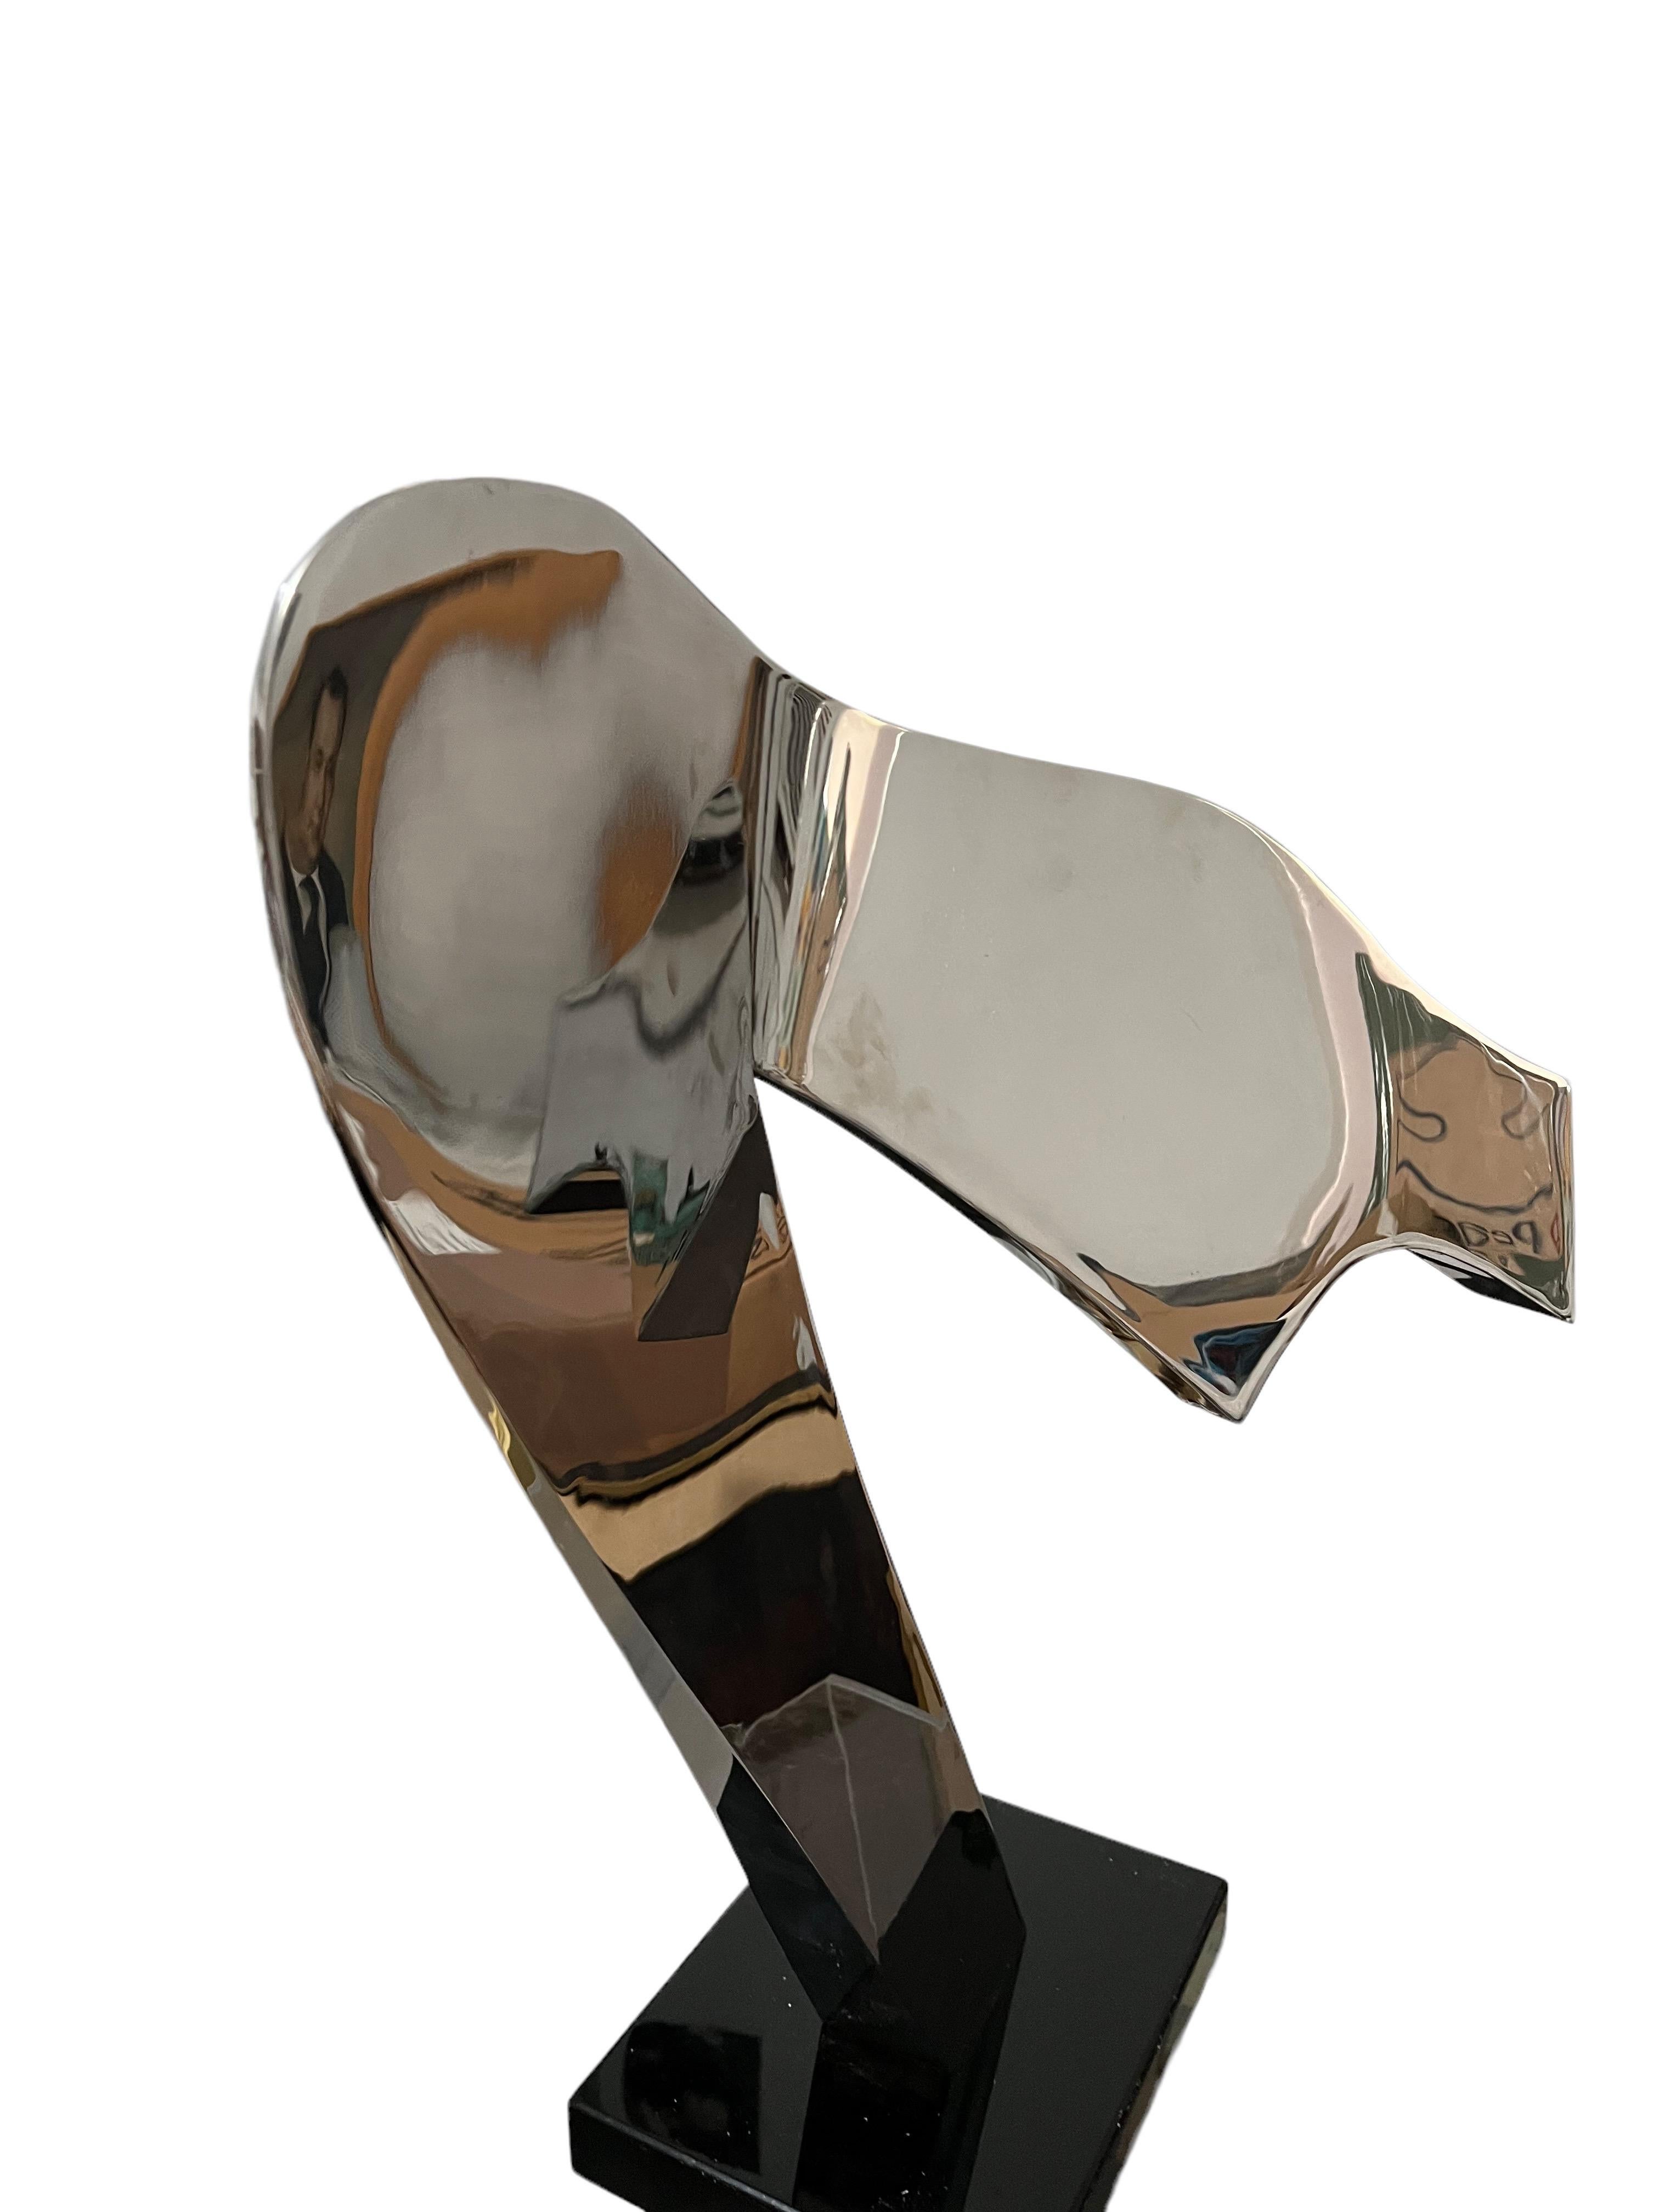 Welded Stainless Steel Reflective Abstract Modernist Sculpture Gary Kahle For Sale 13